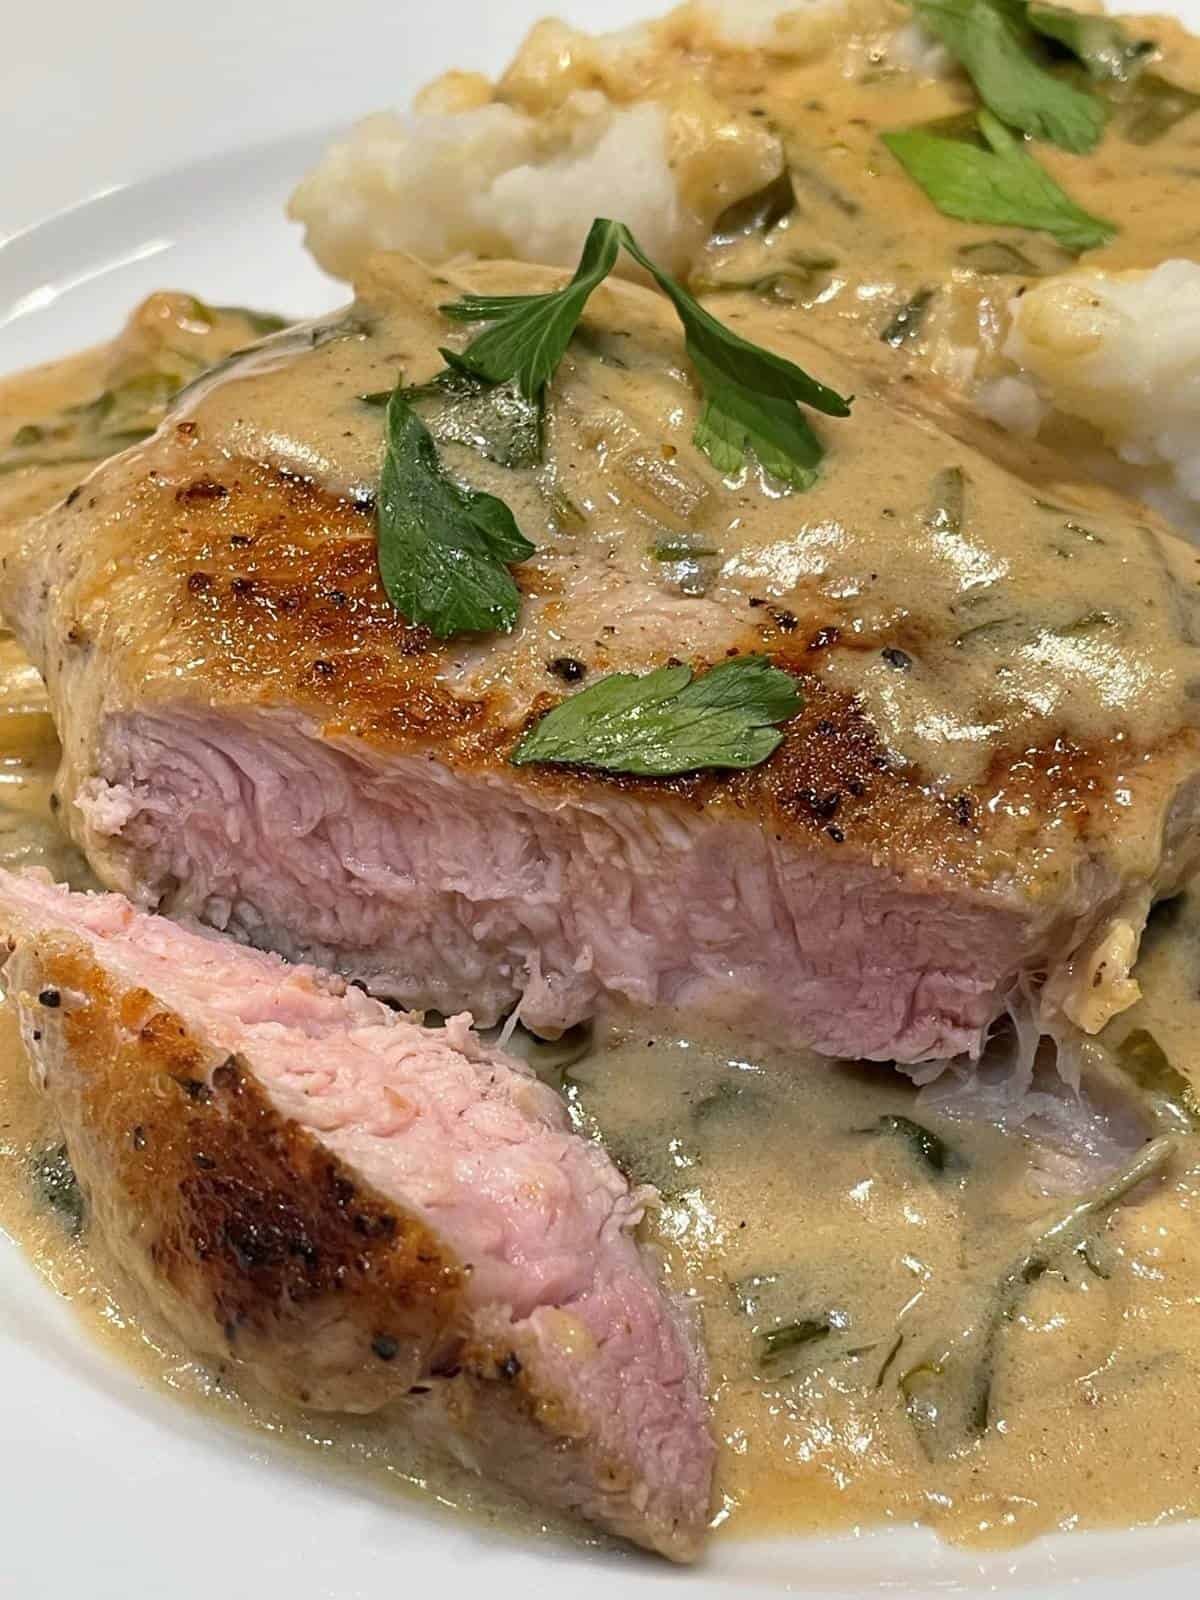 pork chops in sour cream parsley sauce with mashed potatoes